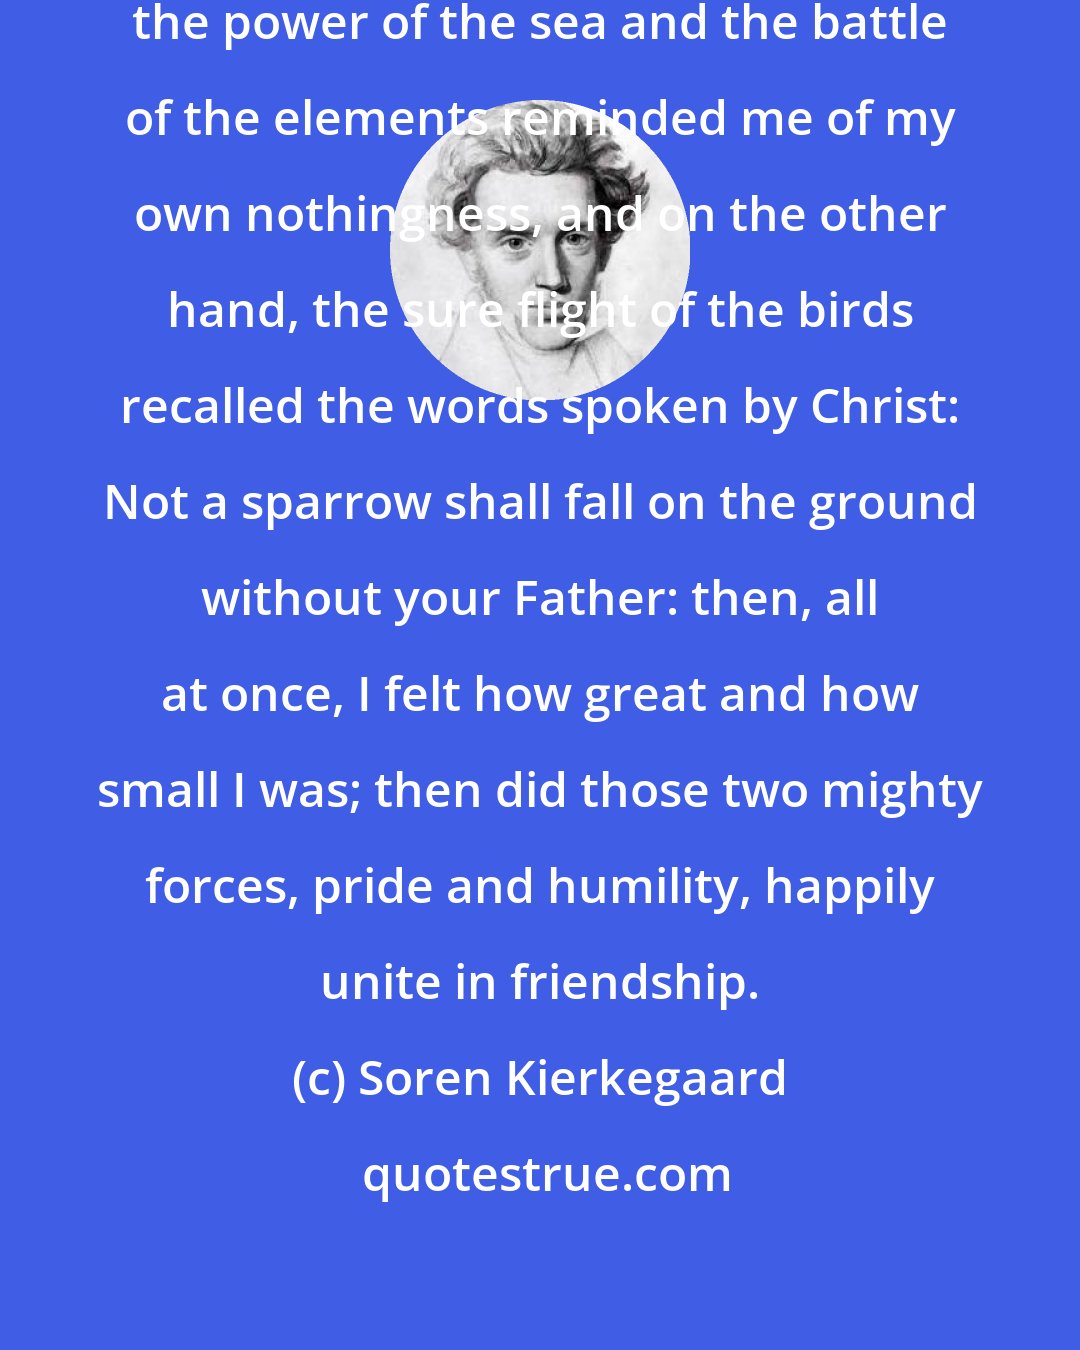 Soren Kierkegaard: As I stood alone and forsaken, and the power of the sea and the battle of the elements reminded me of my own nothingness, and on the other hand, the sure flight of the birds recalled the words spoken by Christ: Not a sparrow shall fall on the ground without your Father: then, all at once, I felt how great and how small I was; then did those two mighty forces, pride and humility, happily unite in friendship.